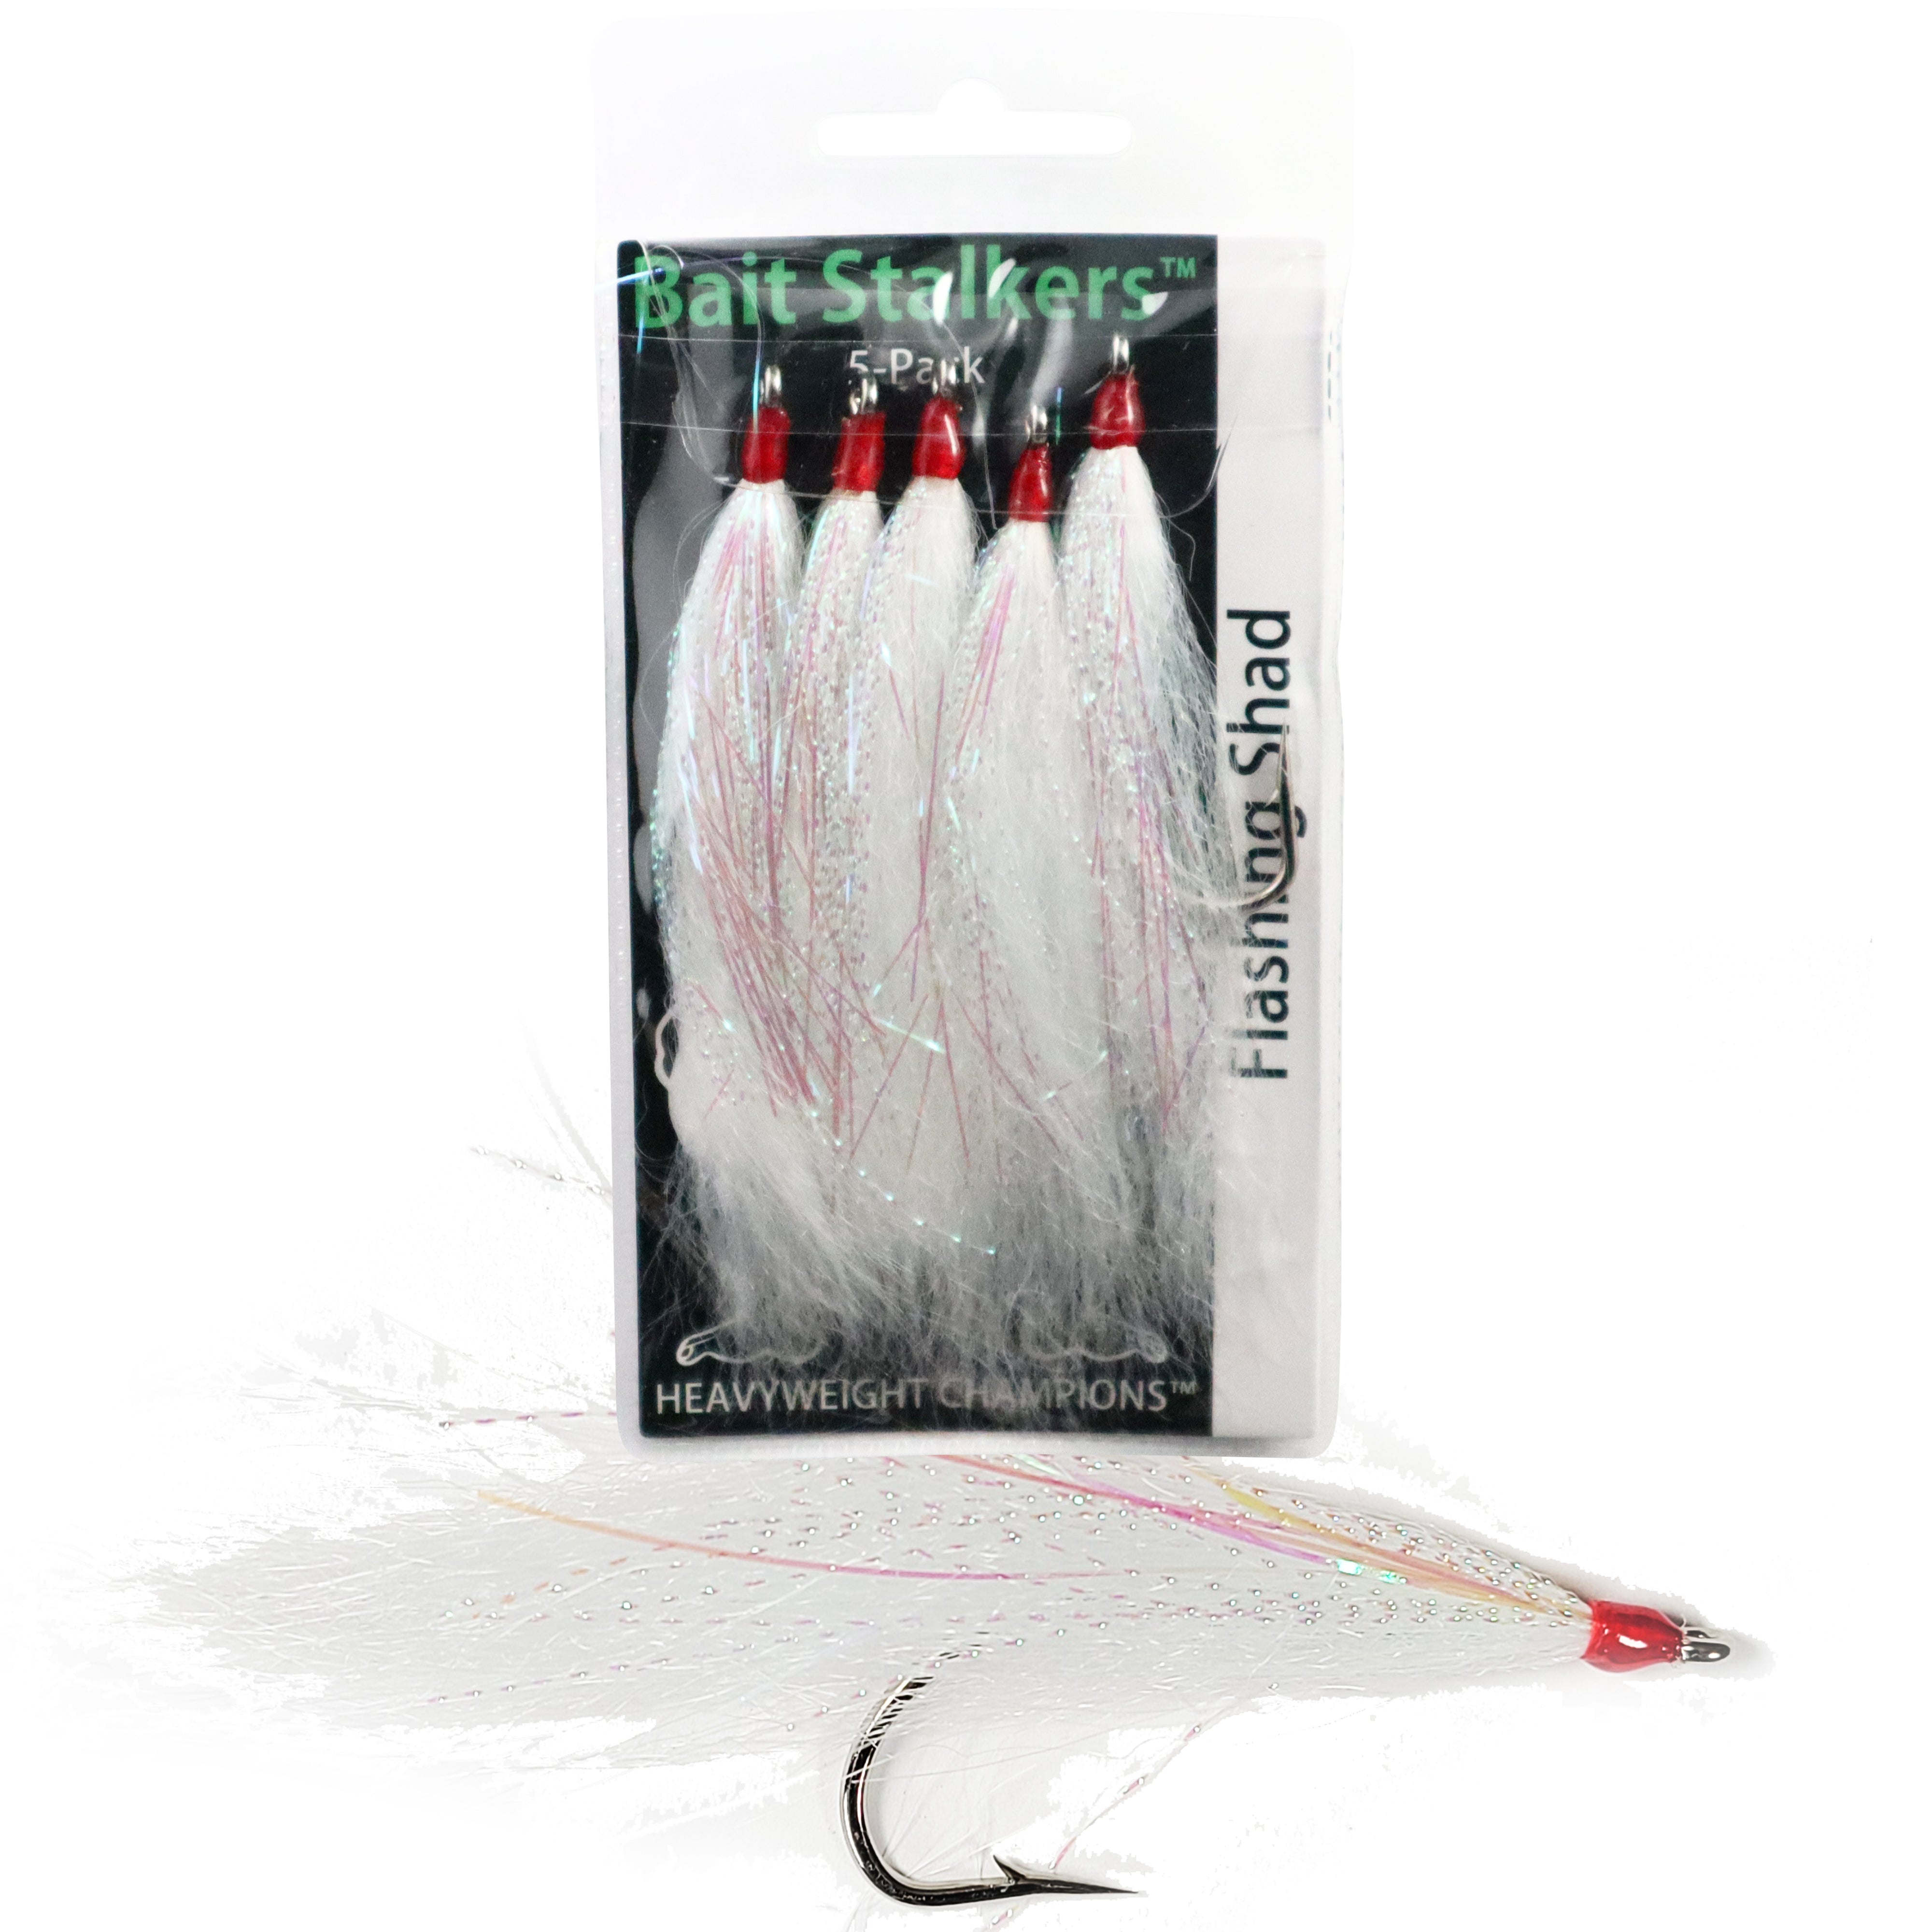 Best Trout Fishing Lures, Flies, and Baits